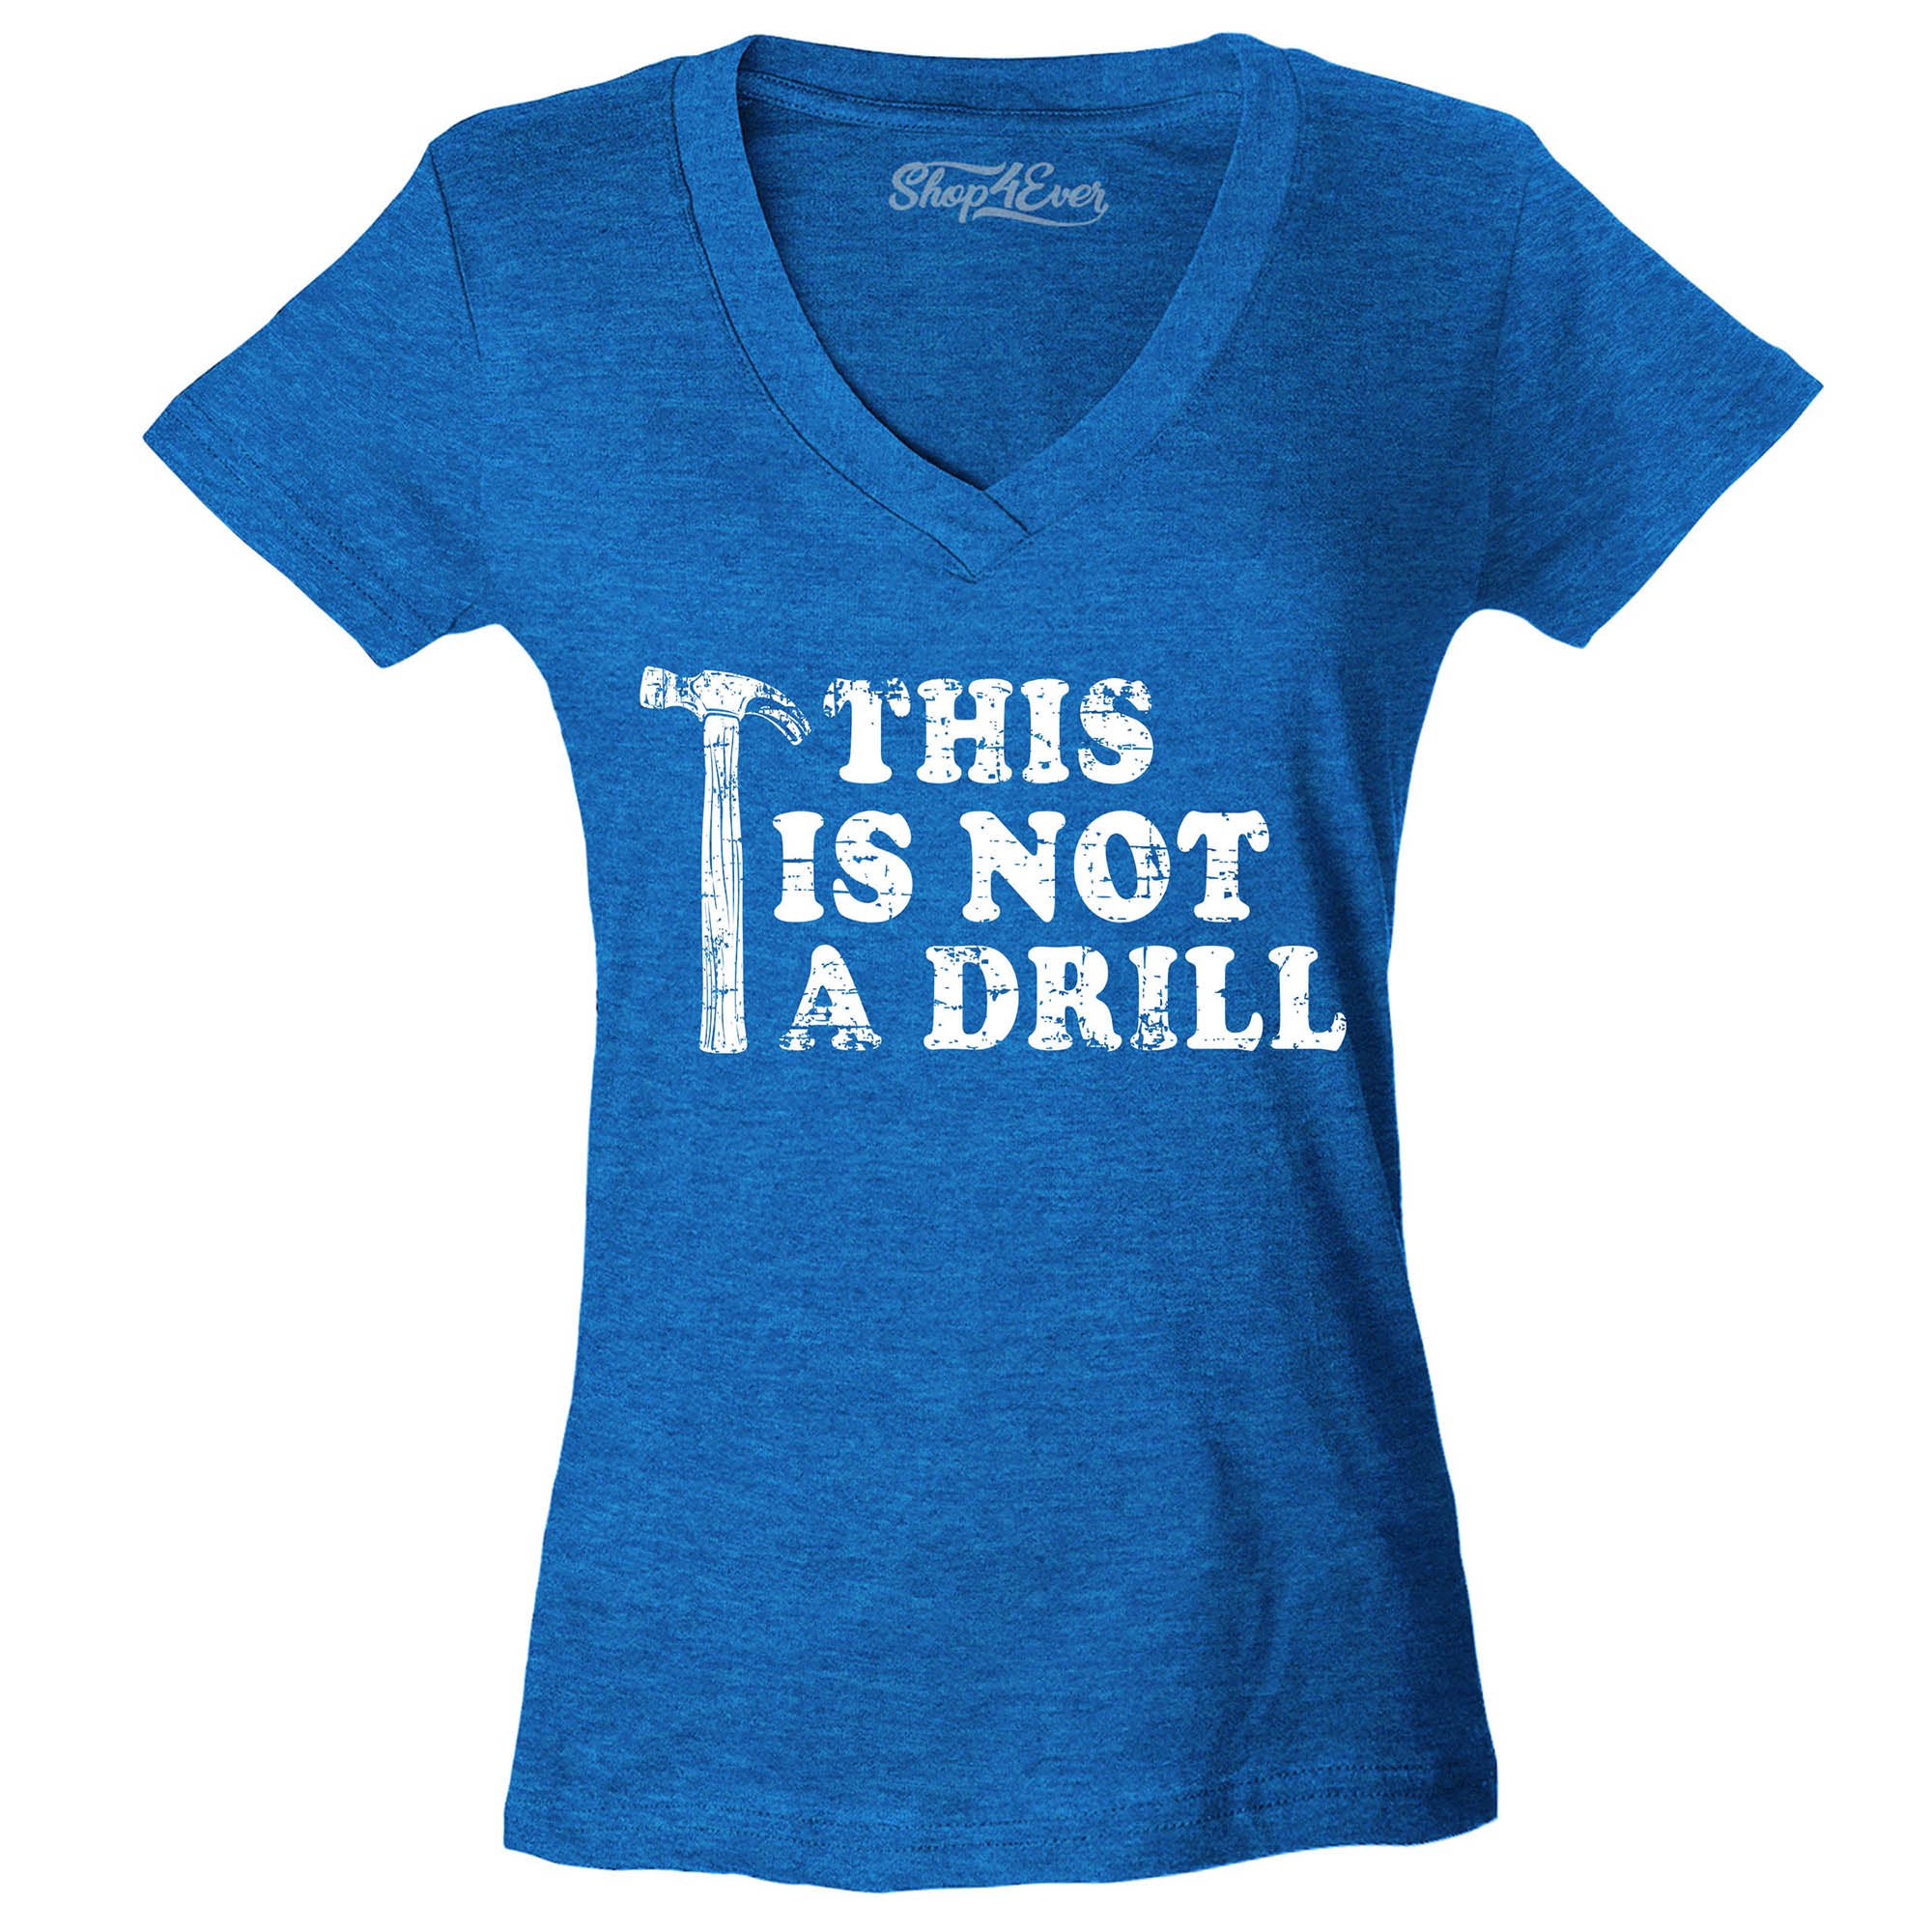 This is Not a Drill Women's V-Neck T-Shirt Slim Fit